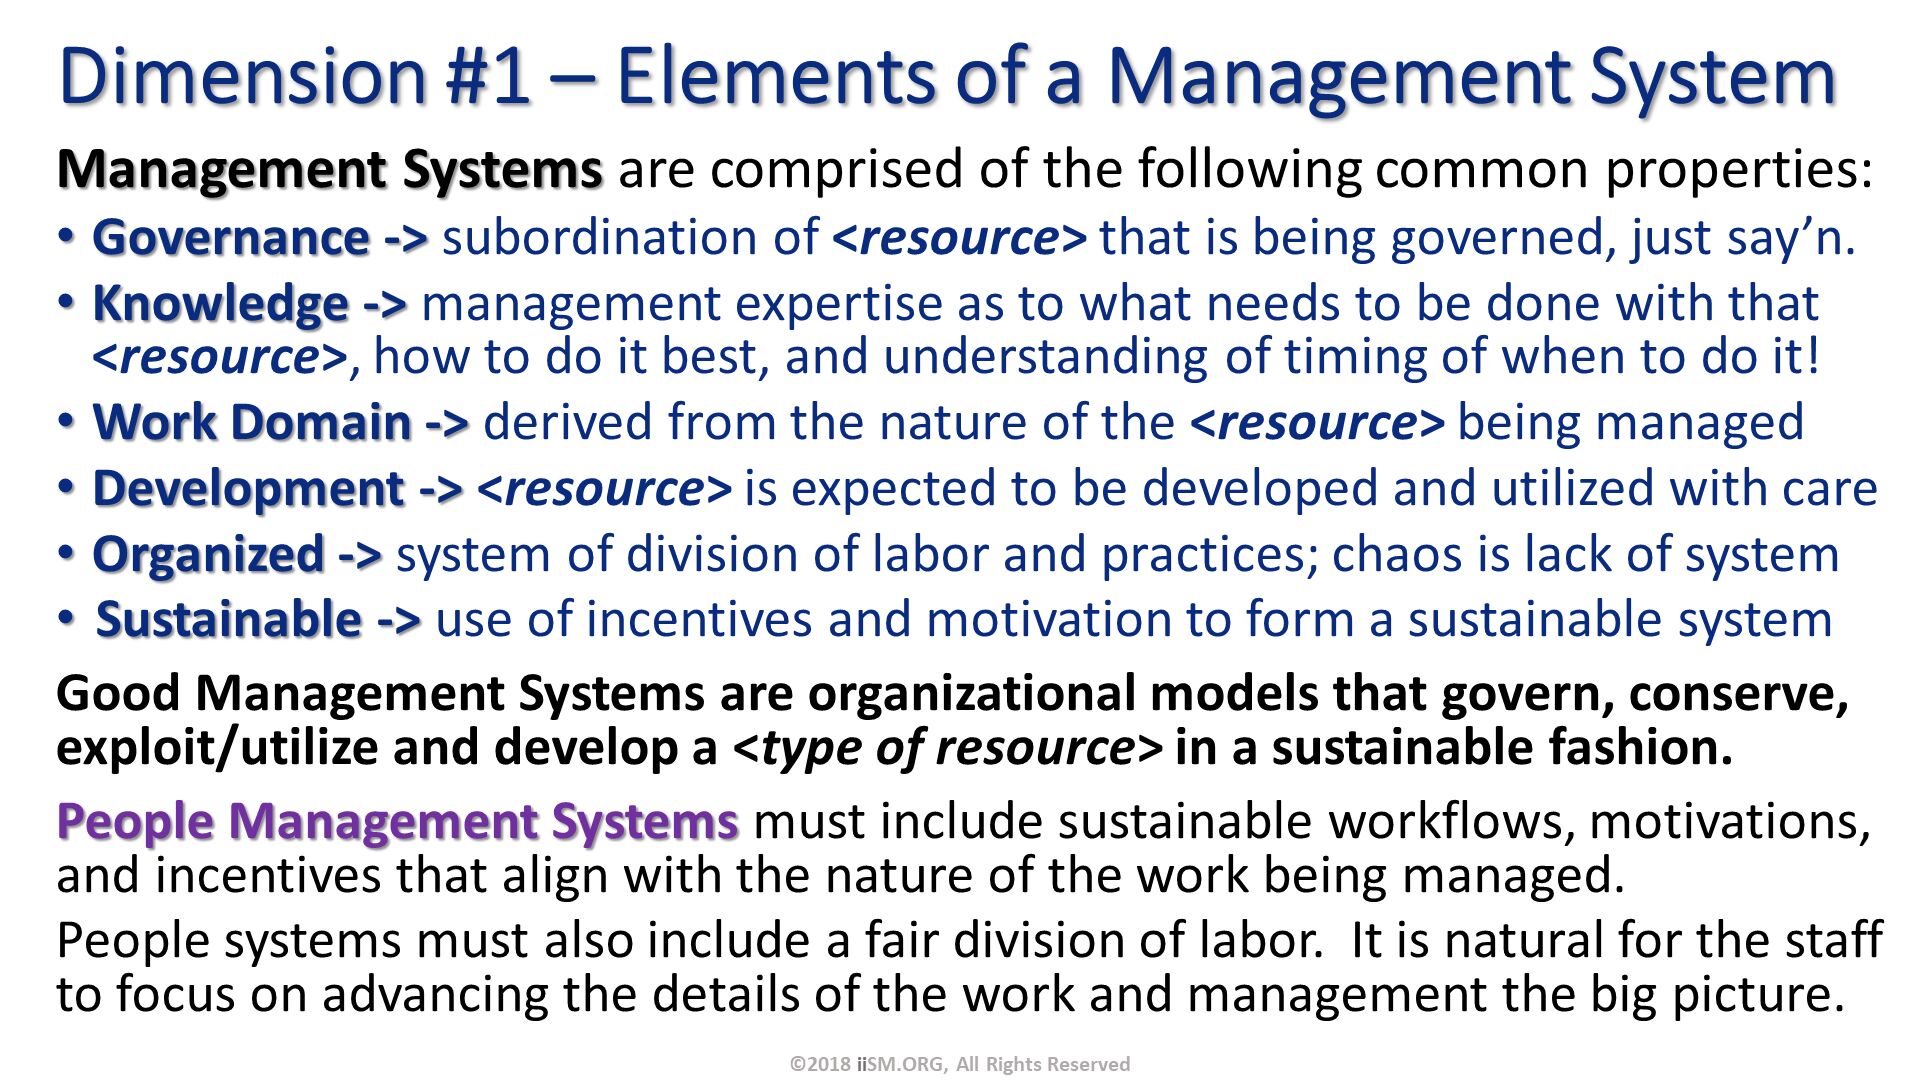 Management Systems are comprised of the following common properties:
Governance -> subordination of <resource> that is being governed, just say’n.
Knowledge -> management expertise as to what needs to be done with that <resource>, how to do it best, and understanding of timing of when to do it!
Work Domain -> derived from the nature of the <resource> being managed
Development -> <resource> is expected to be developed and utilized with care
Organized -> system of division of labor and practices; chaos is lack of system
Sustainable -> use of incentives and motivation to form a sustainable system
Good Management Systems are organizational models that govern, conserve, exploit/utilize and develop a <type of resource> in a sustainable fashion.
People Management Systems must include sustainable workflows, motivations, and incentives that align with the nature of the work being managed.
People systems must also include a fair division of labor.  It is natural for the staff to focus on advancing the details of the work and management the big picture. . Dimension #1 – Elements of a Management System. ©2018 iiSM.ORG, All Rights Reserved. 